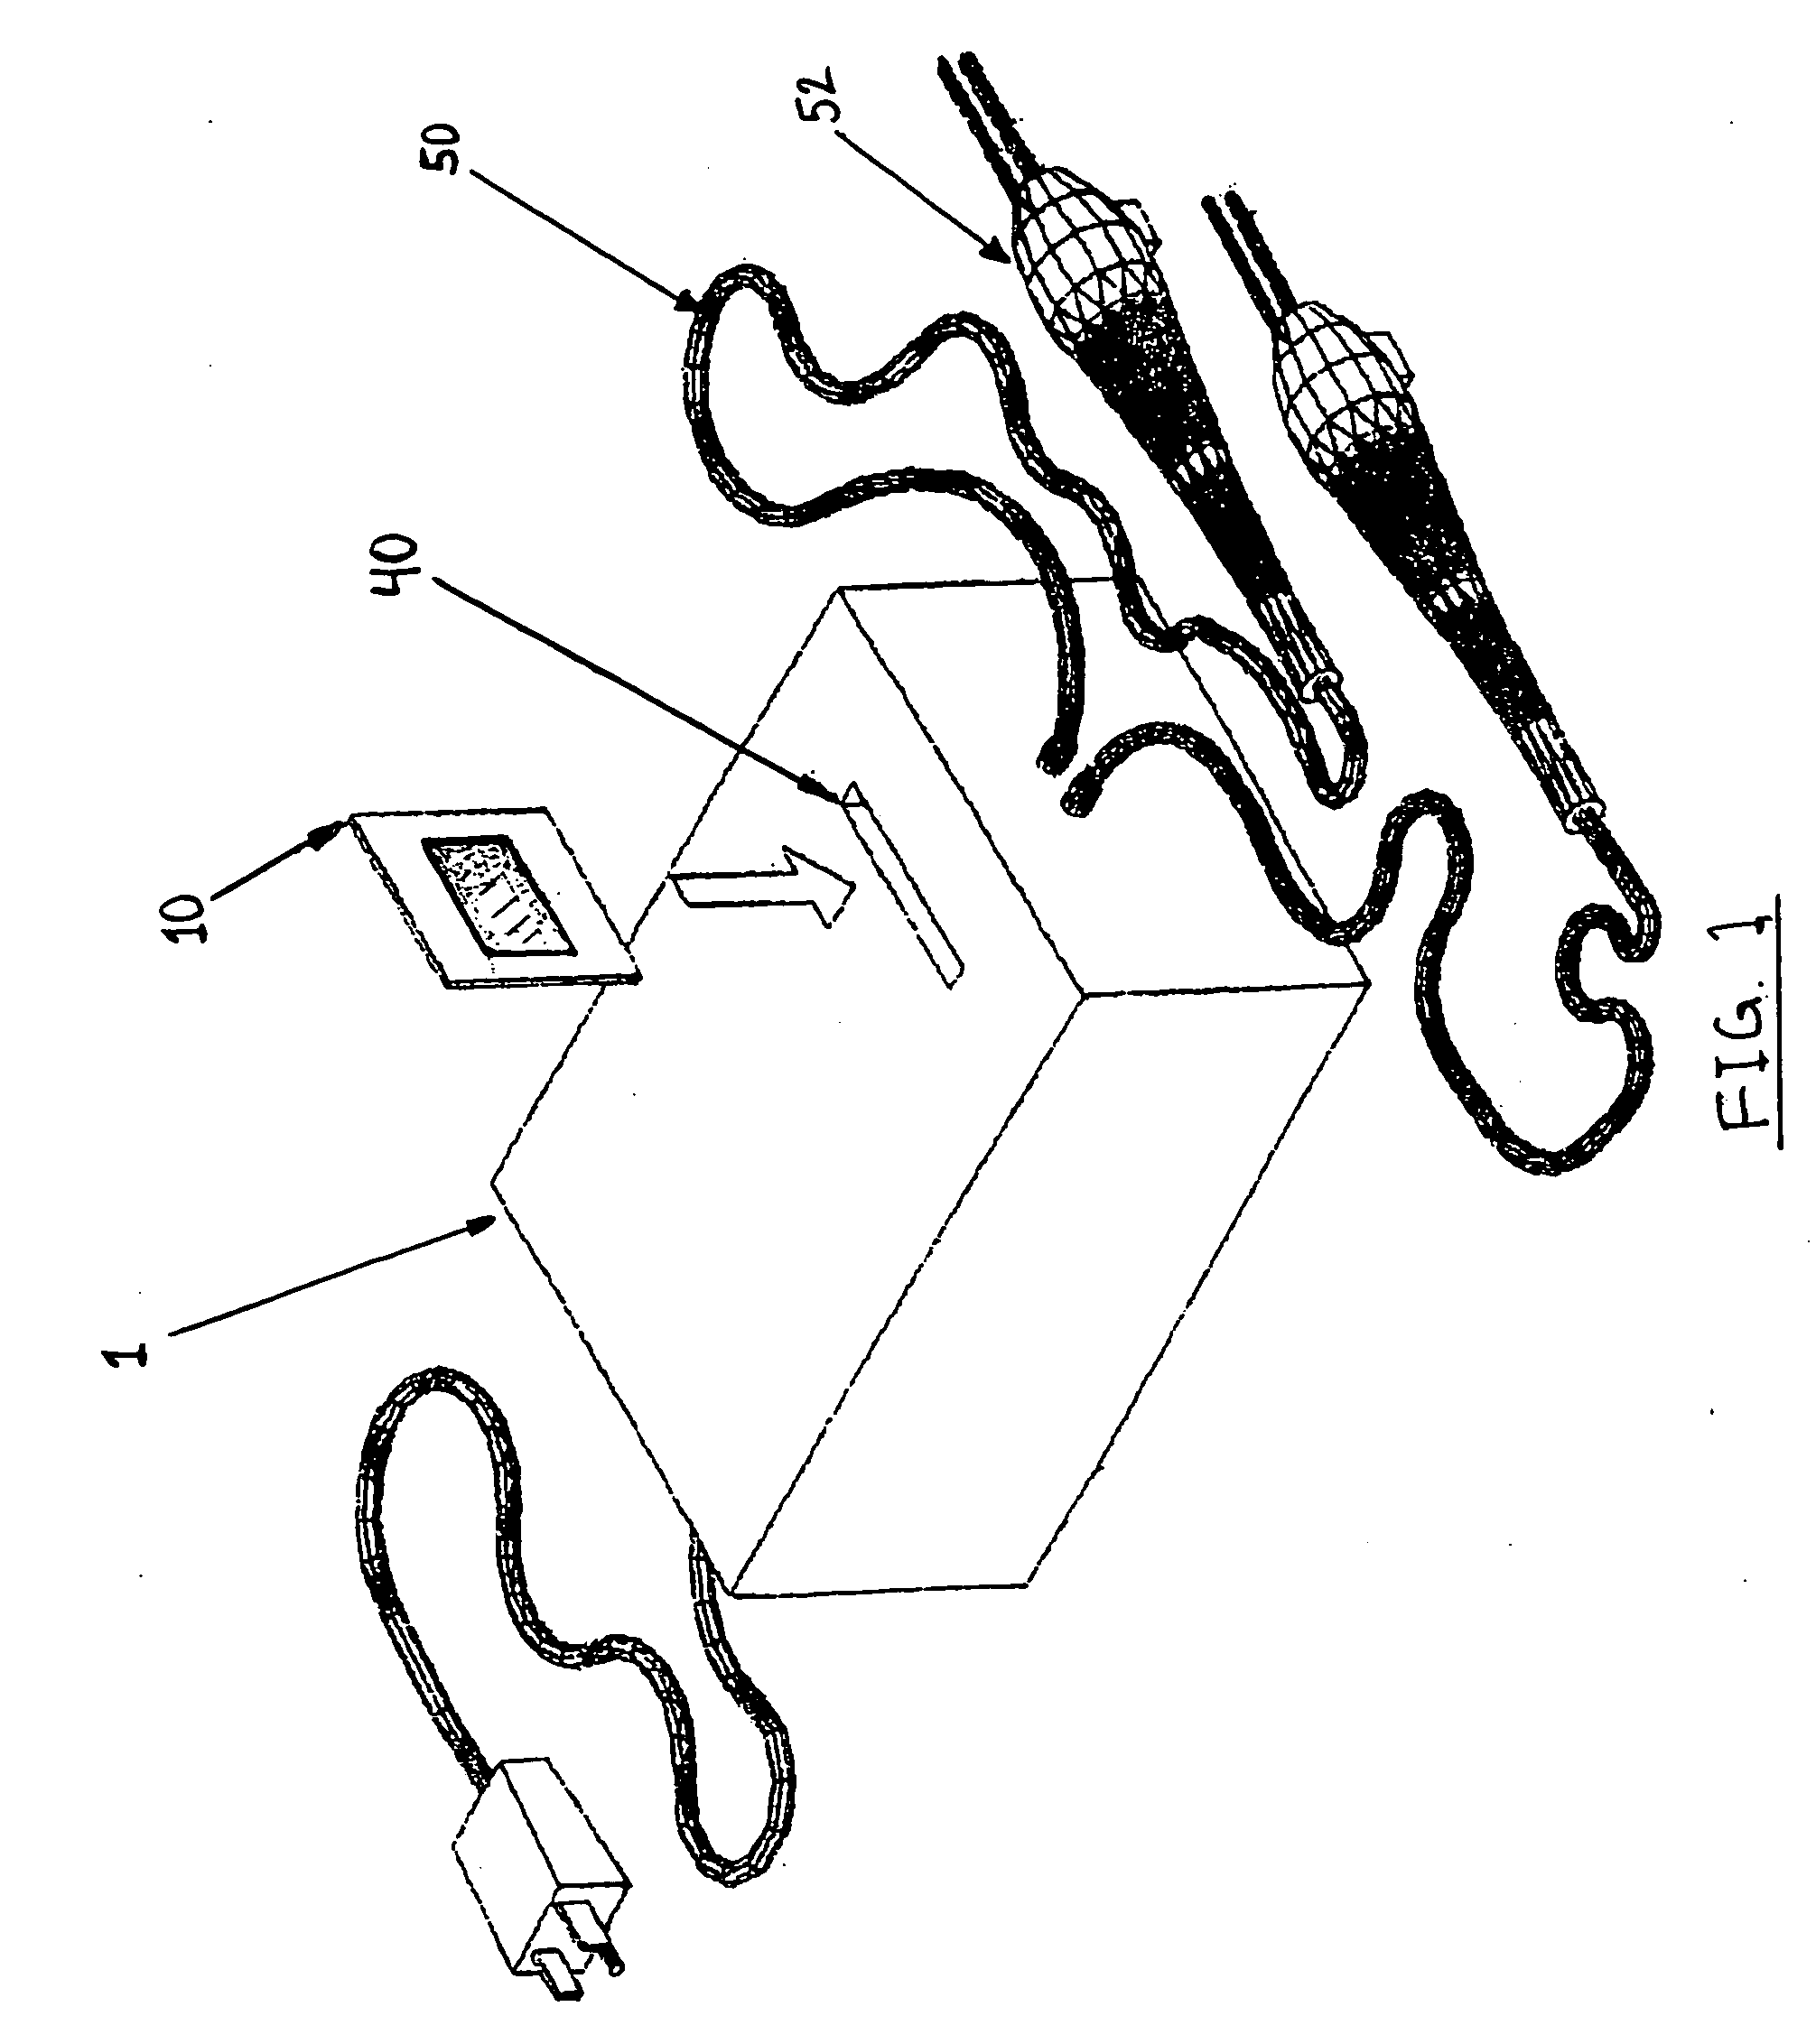 Method and apparatus for particle radiation therapy and practice of particle medicine